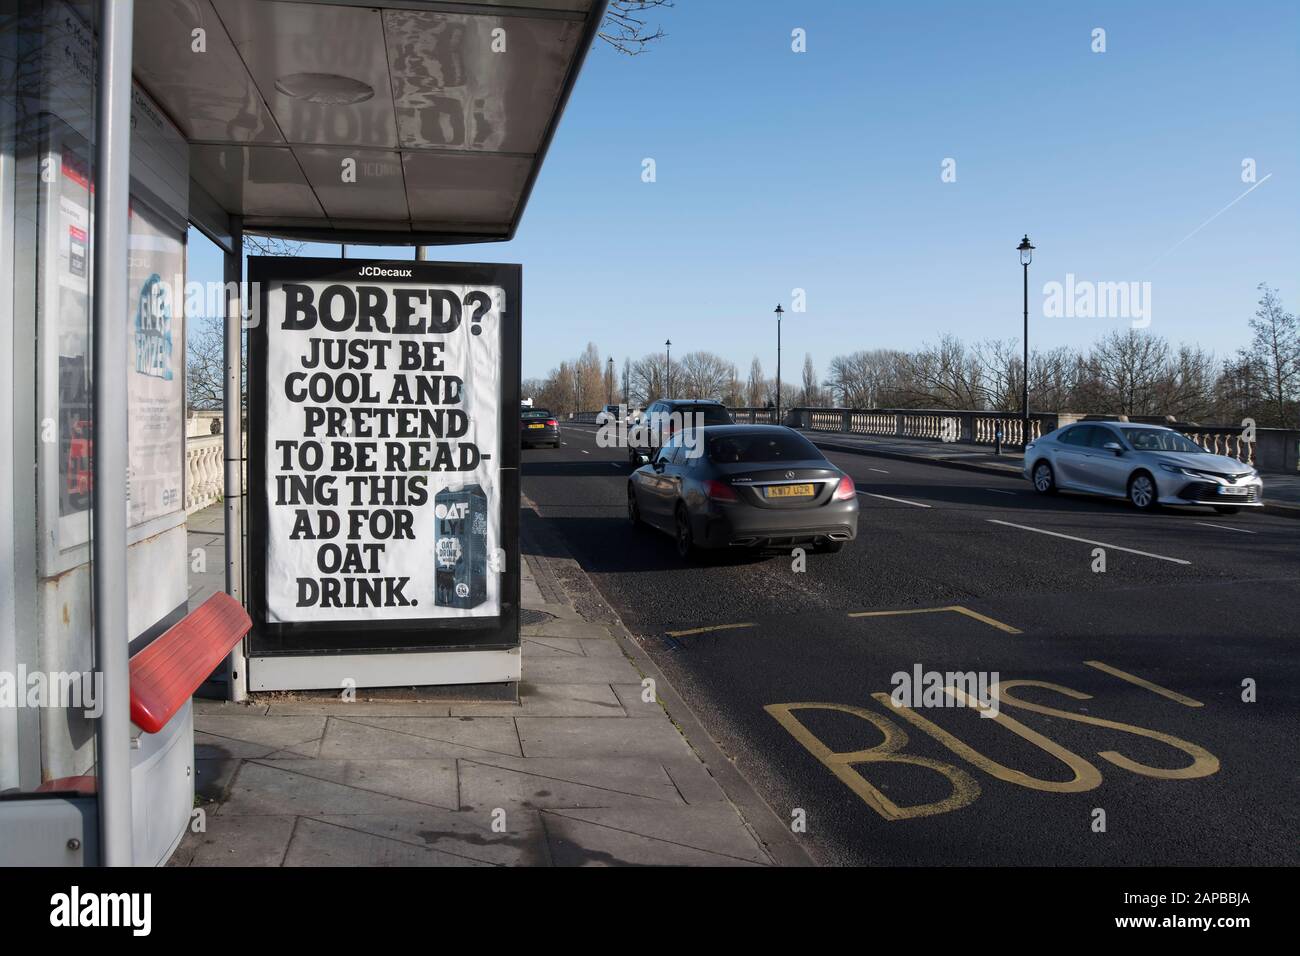 bus stop on chiswick bridge, london, england, with large advertisement for oatly drinks with text asking bored? Stock Photo